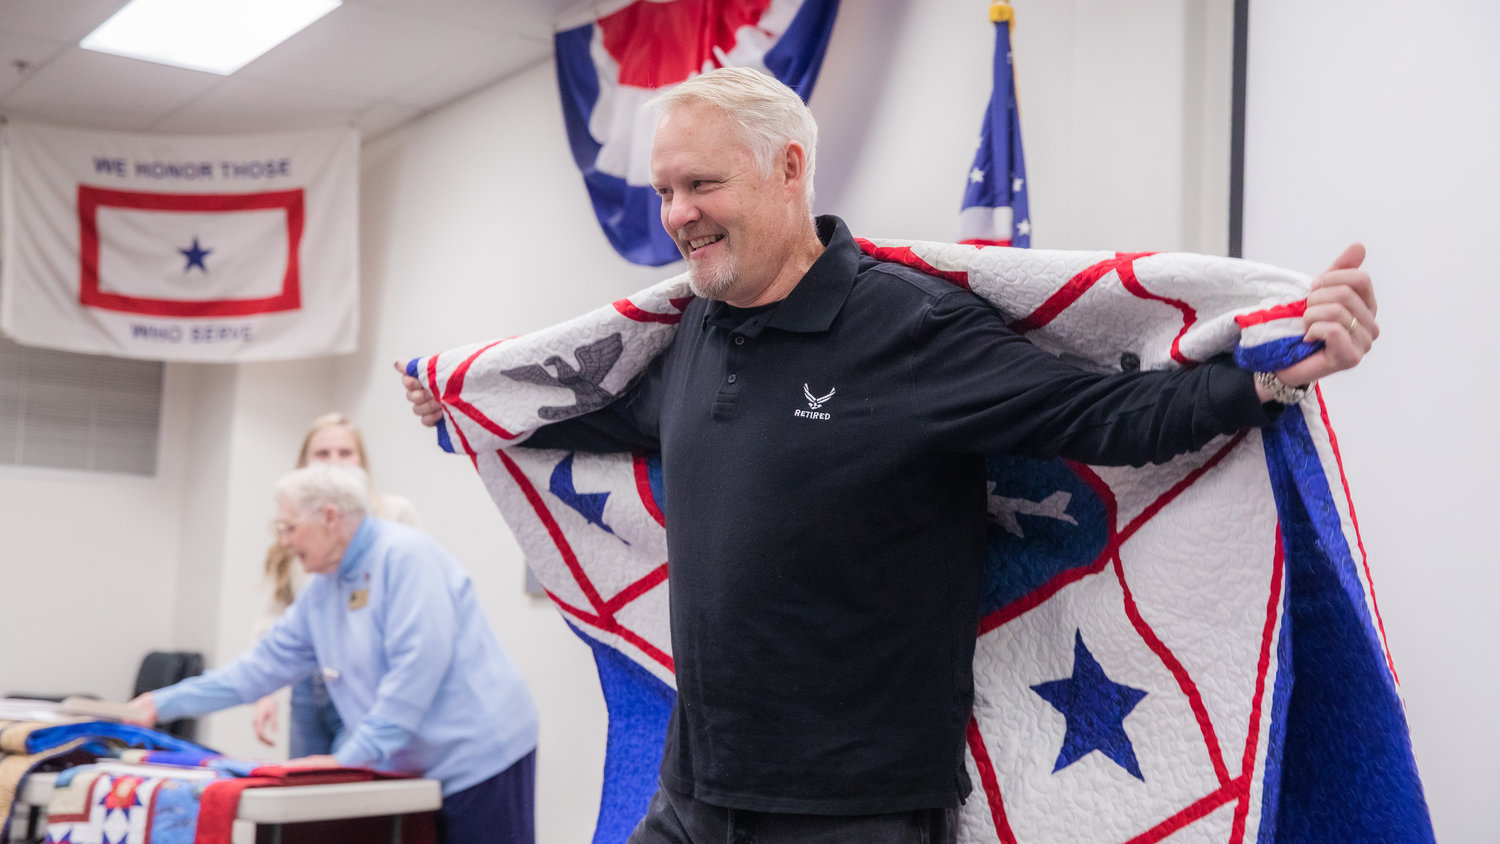 Col. Patrick Taylor smiles as he is presented with a Quilt of Valor on Veterans Day during the 25th anniversary of the Veterans Memorial Museum.